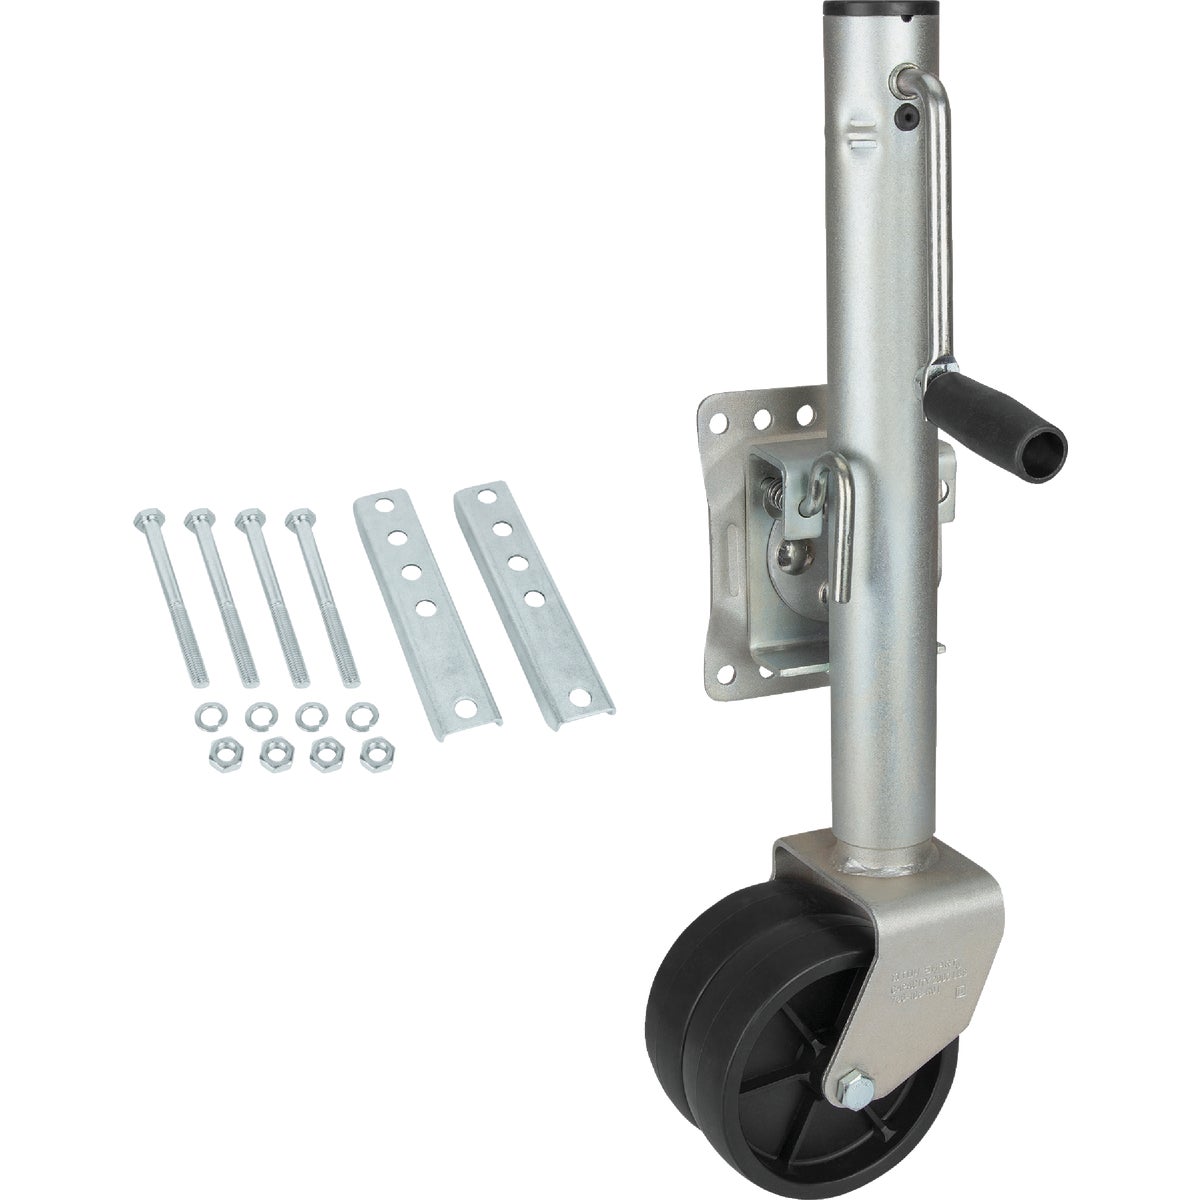 Item 582972, The TowSmart Dual Wheel Side Wind, Swing Down, Bolt-on Trailer Jack allows 